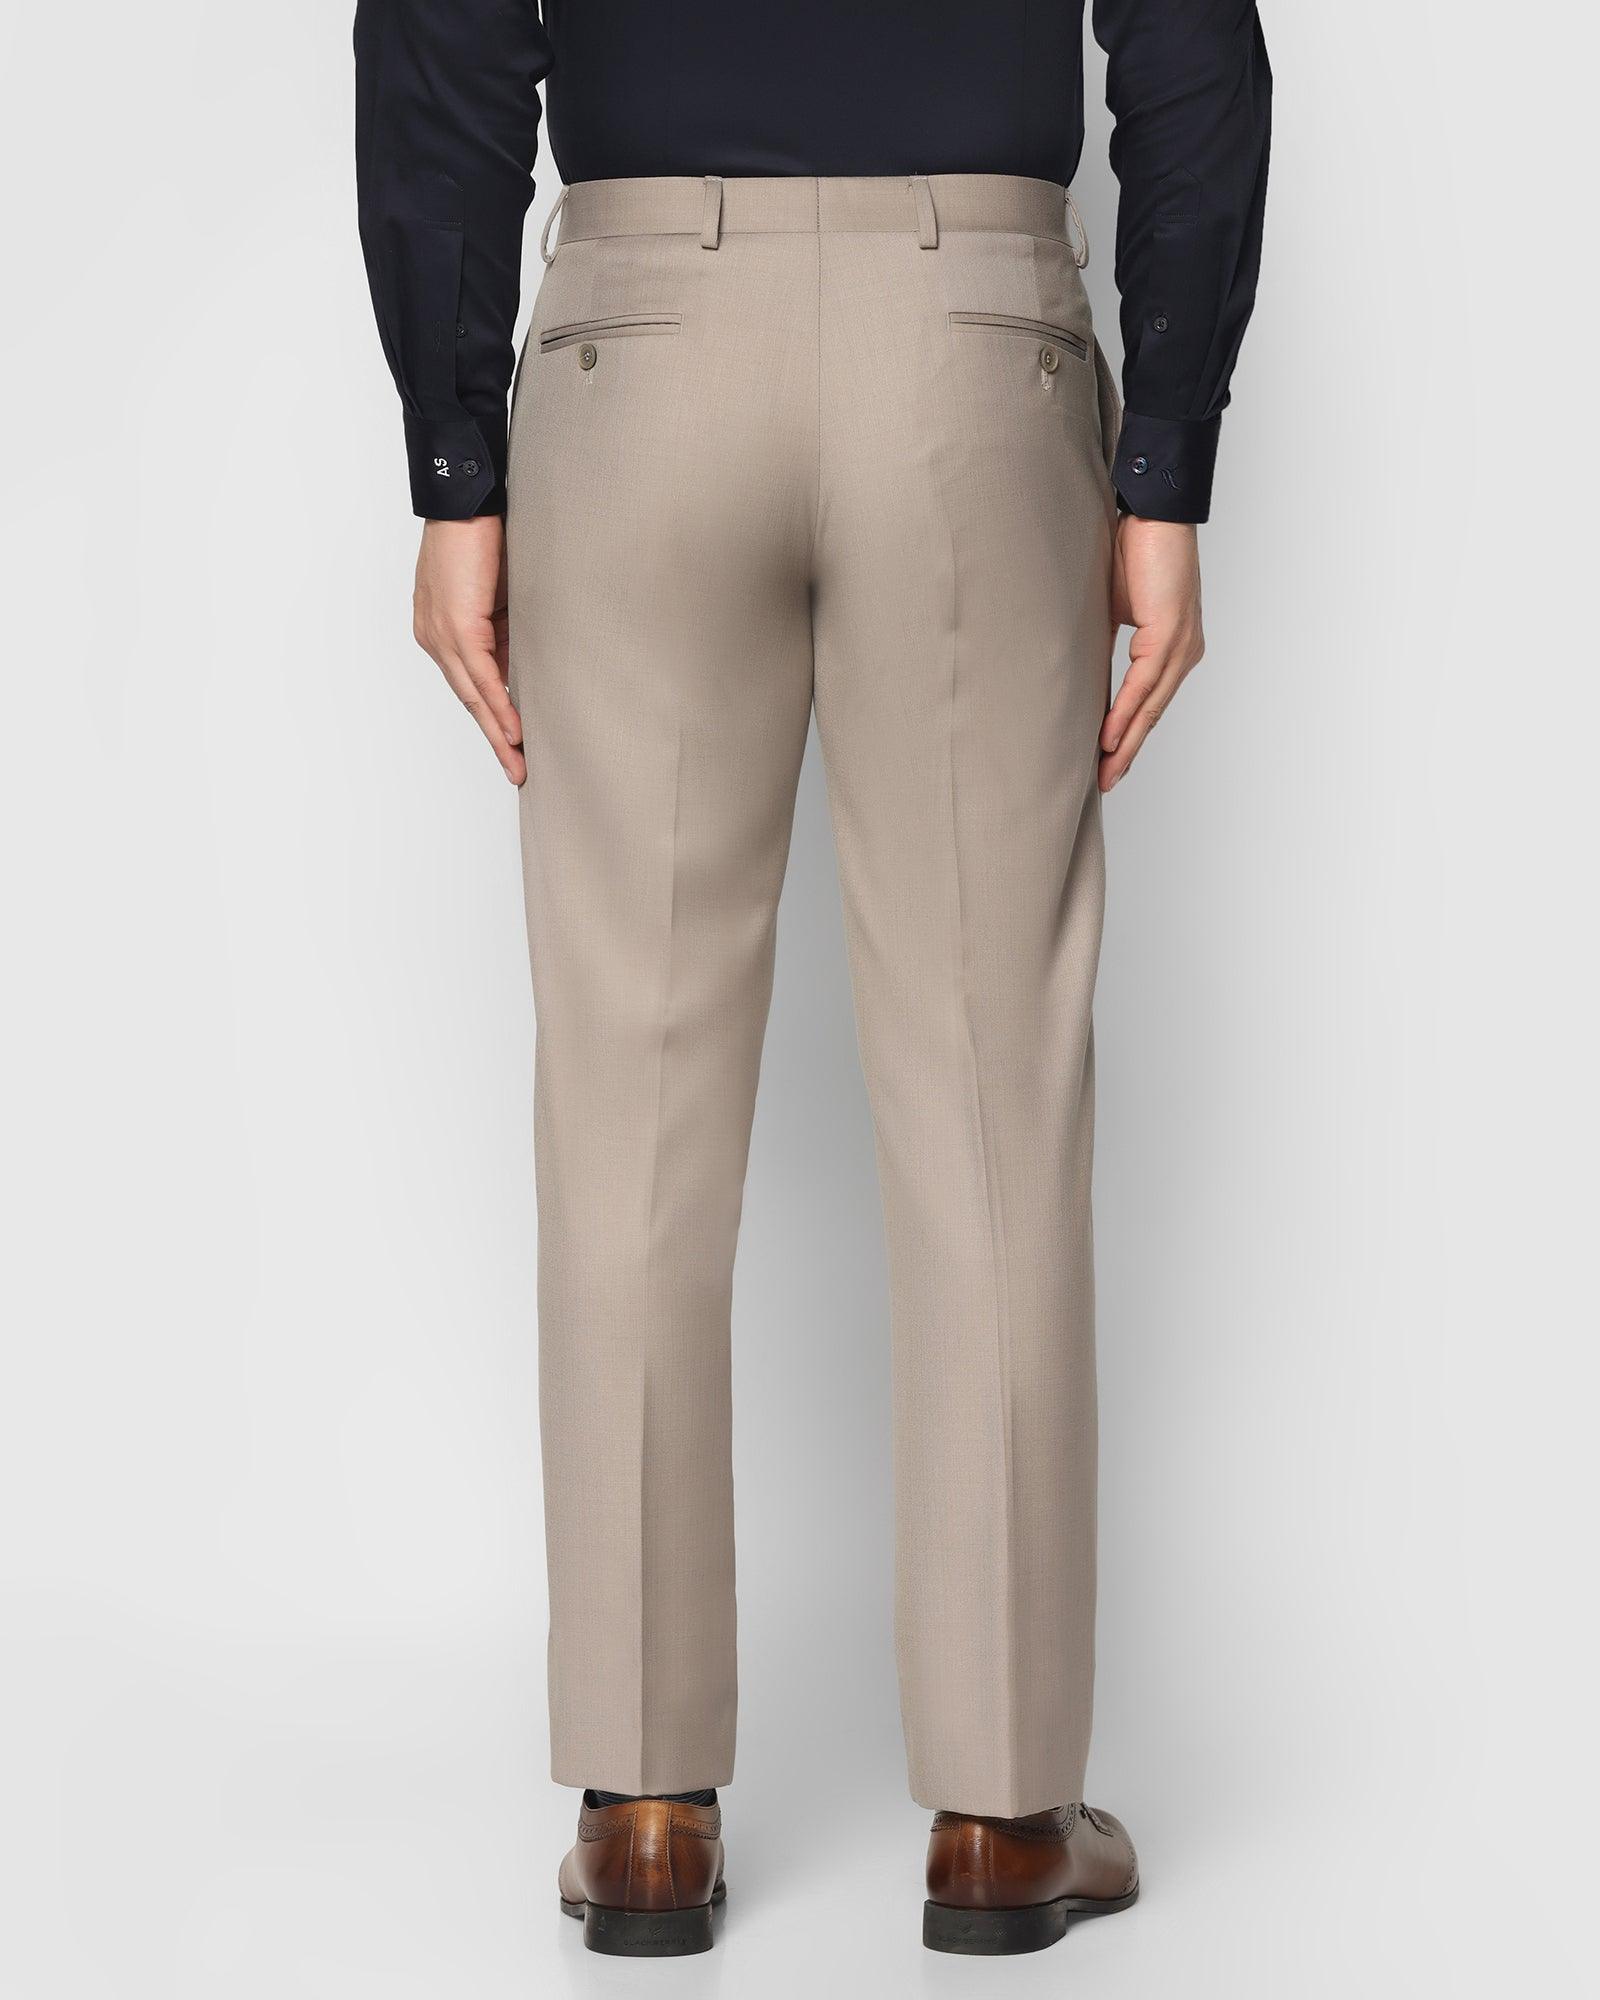 John Lewis Wool Hopsack Tailored Suit Trousers, Grey, 30R